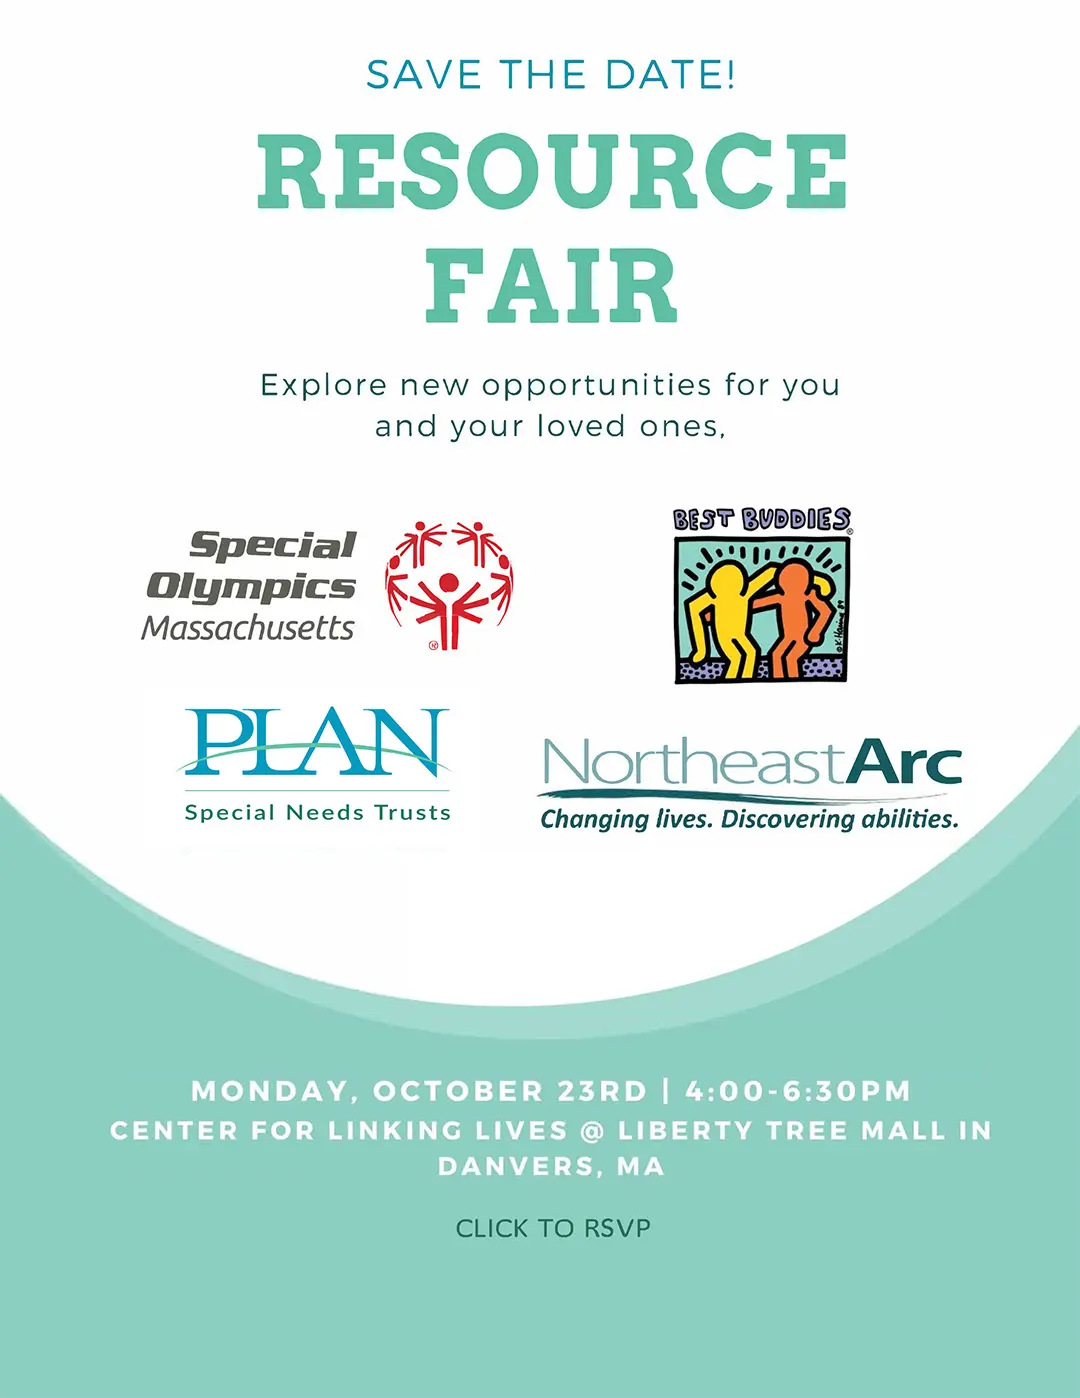 Resource Fair - Save the Date